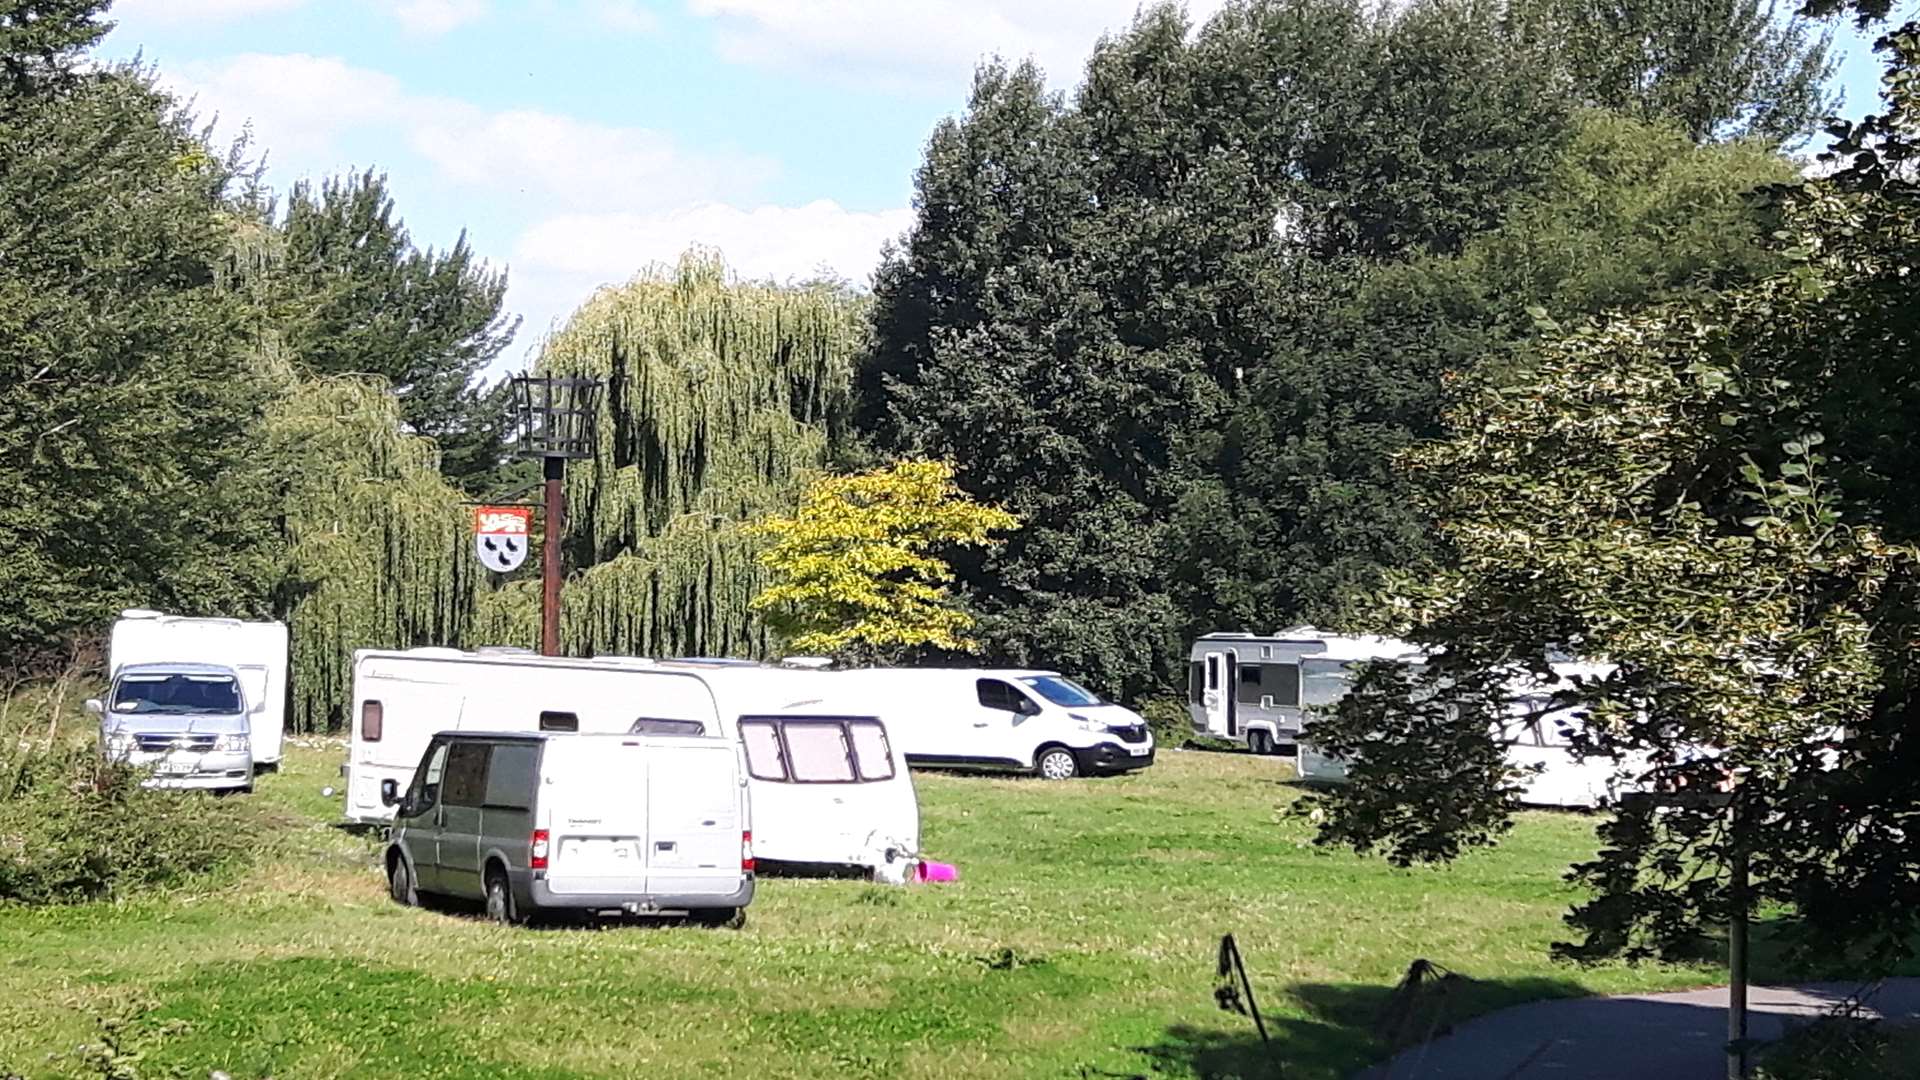 The travellers have set up on Tannery Field off Rheims Way